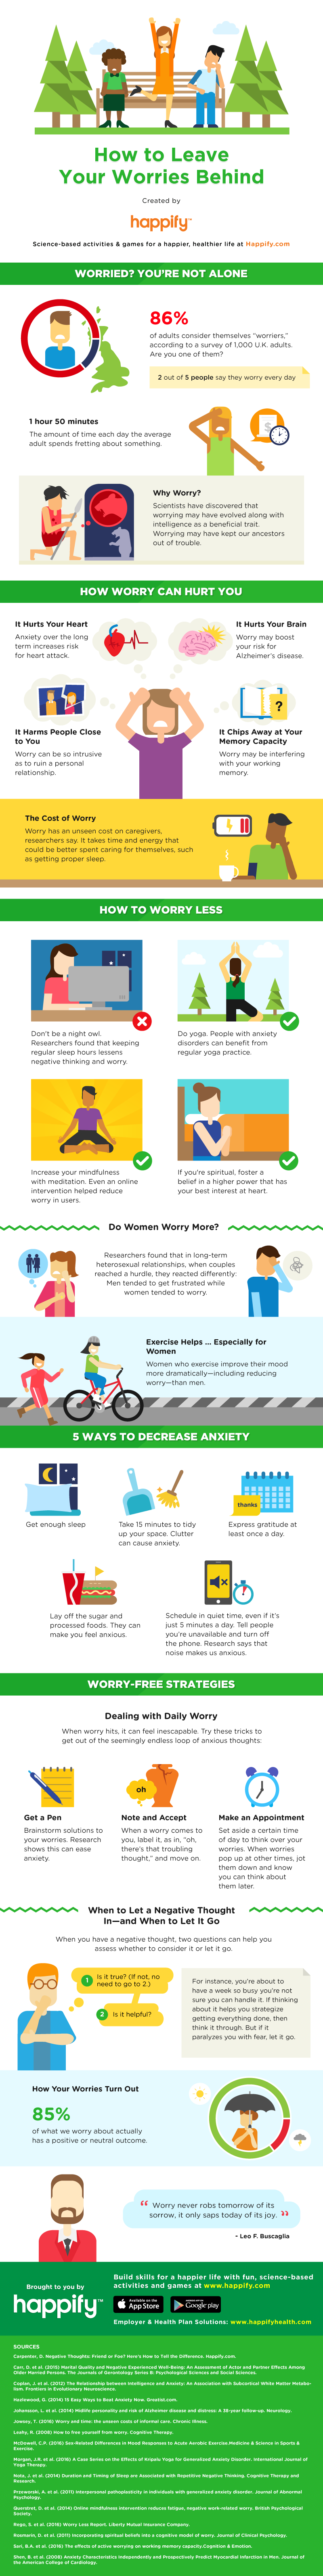 How to stop worrying (infographic)